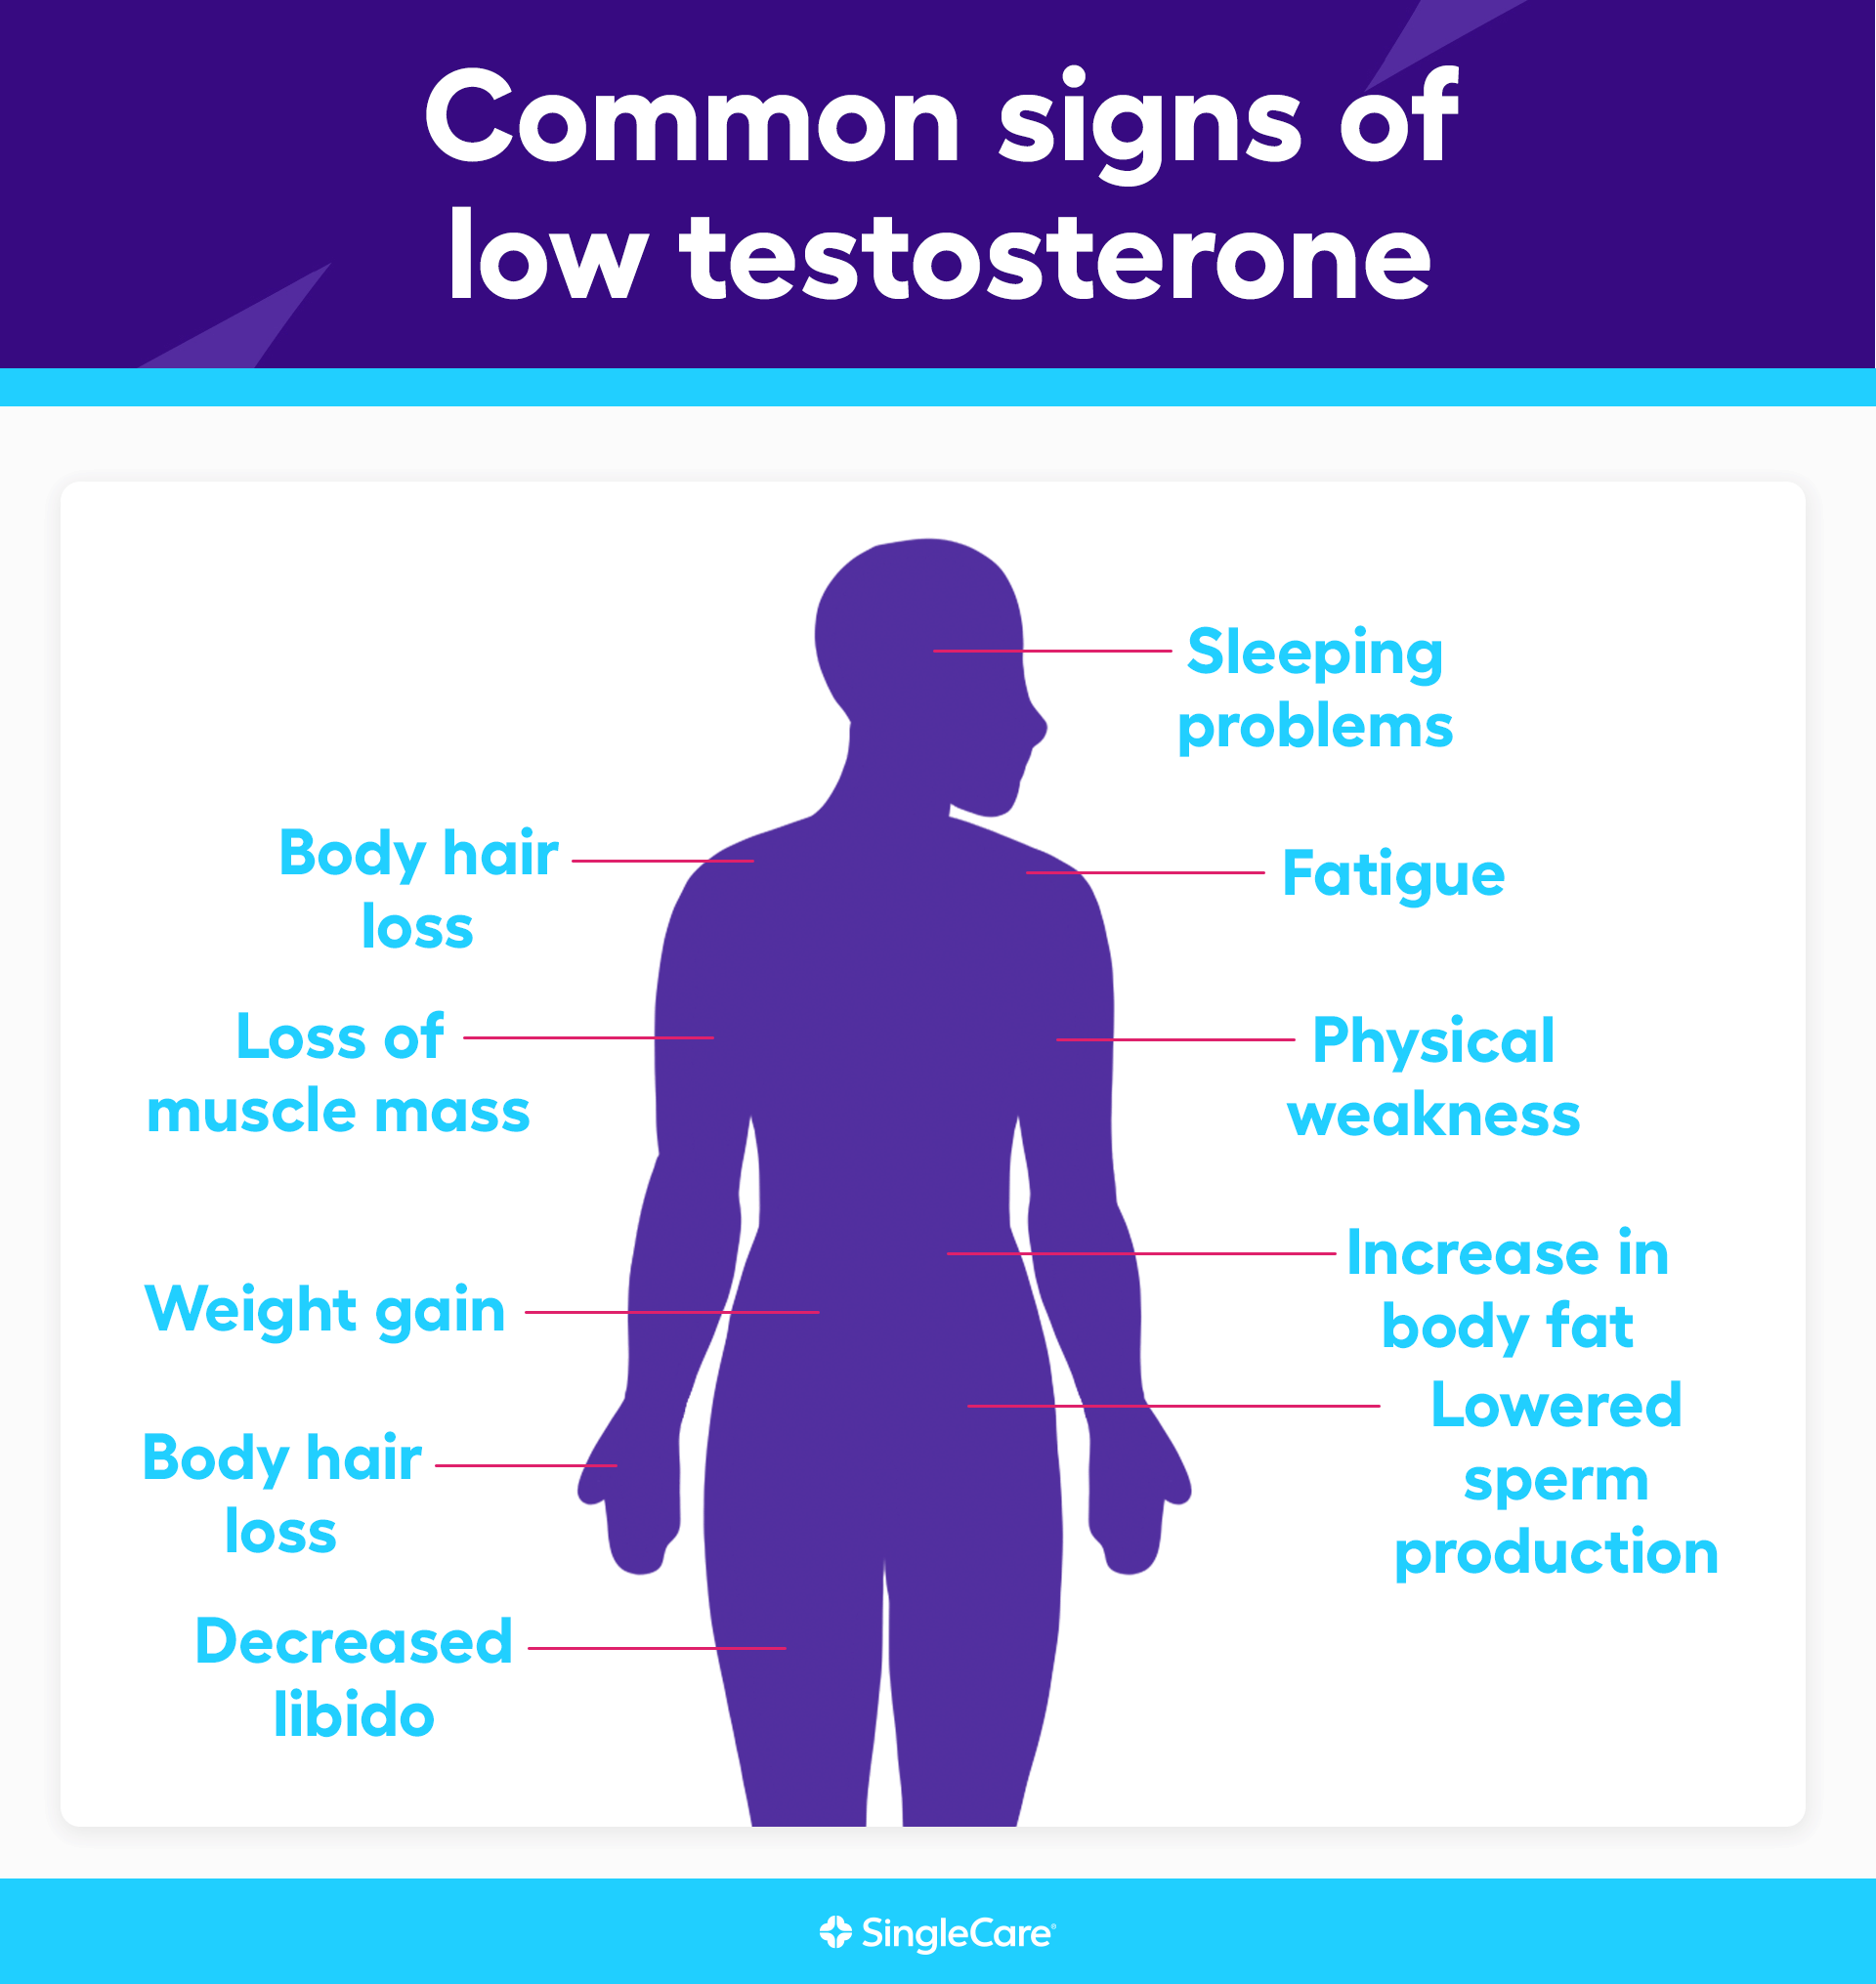 What are the signs of low testosterone?